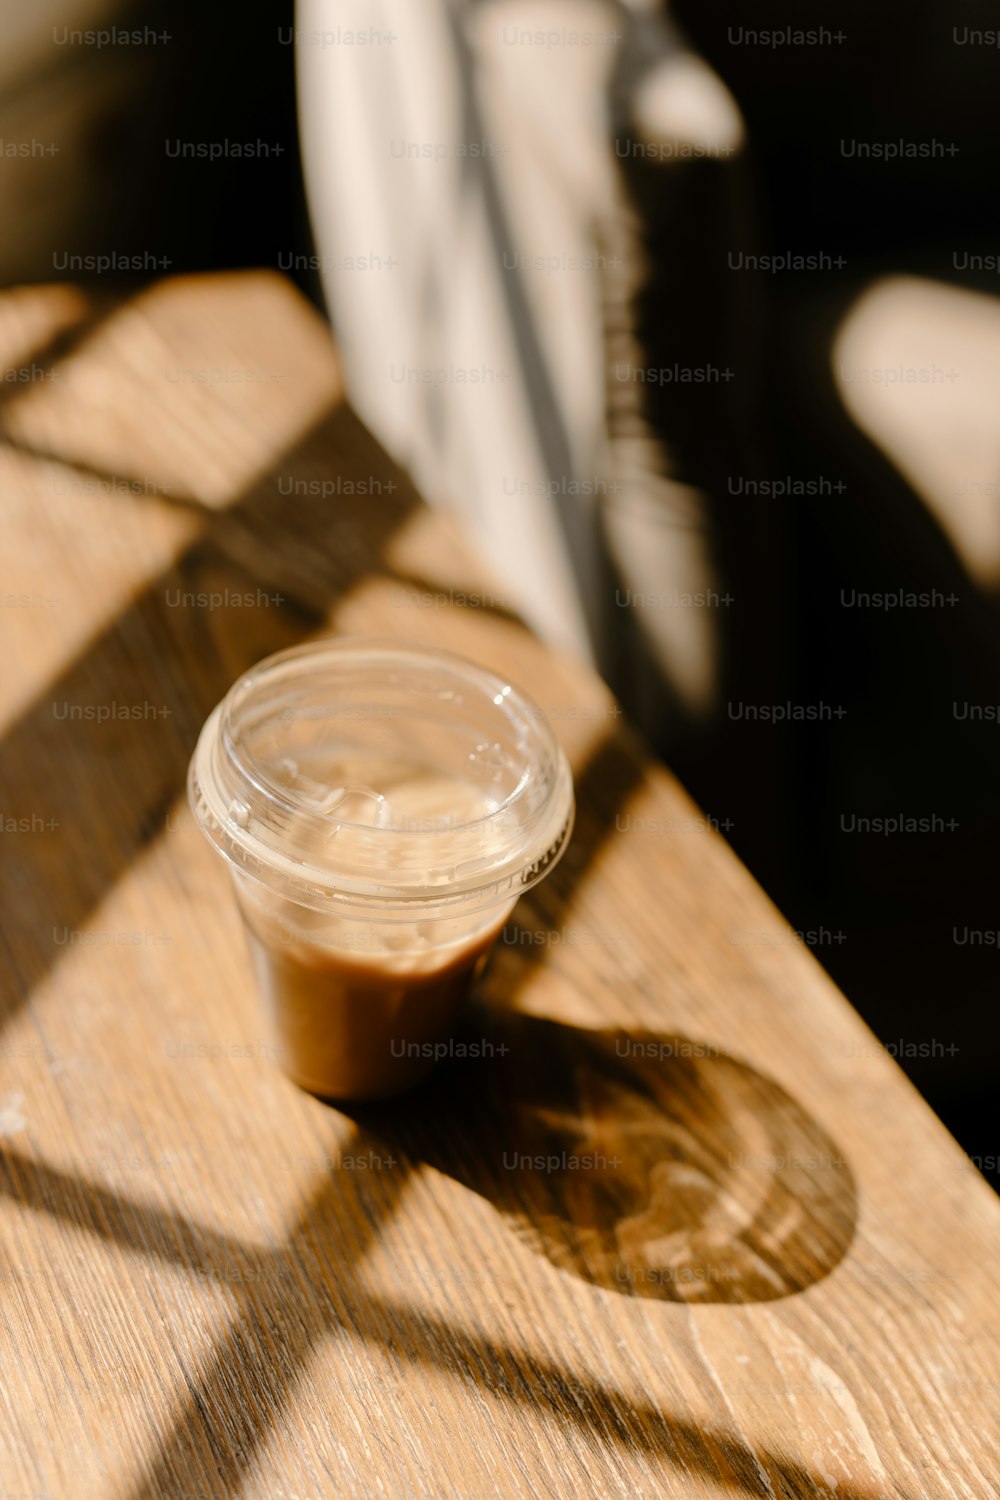 a plastic cup sitting on top of a wooden table